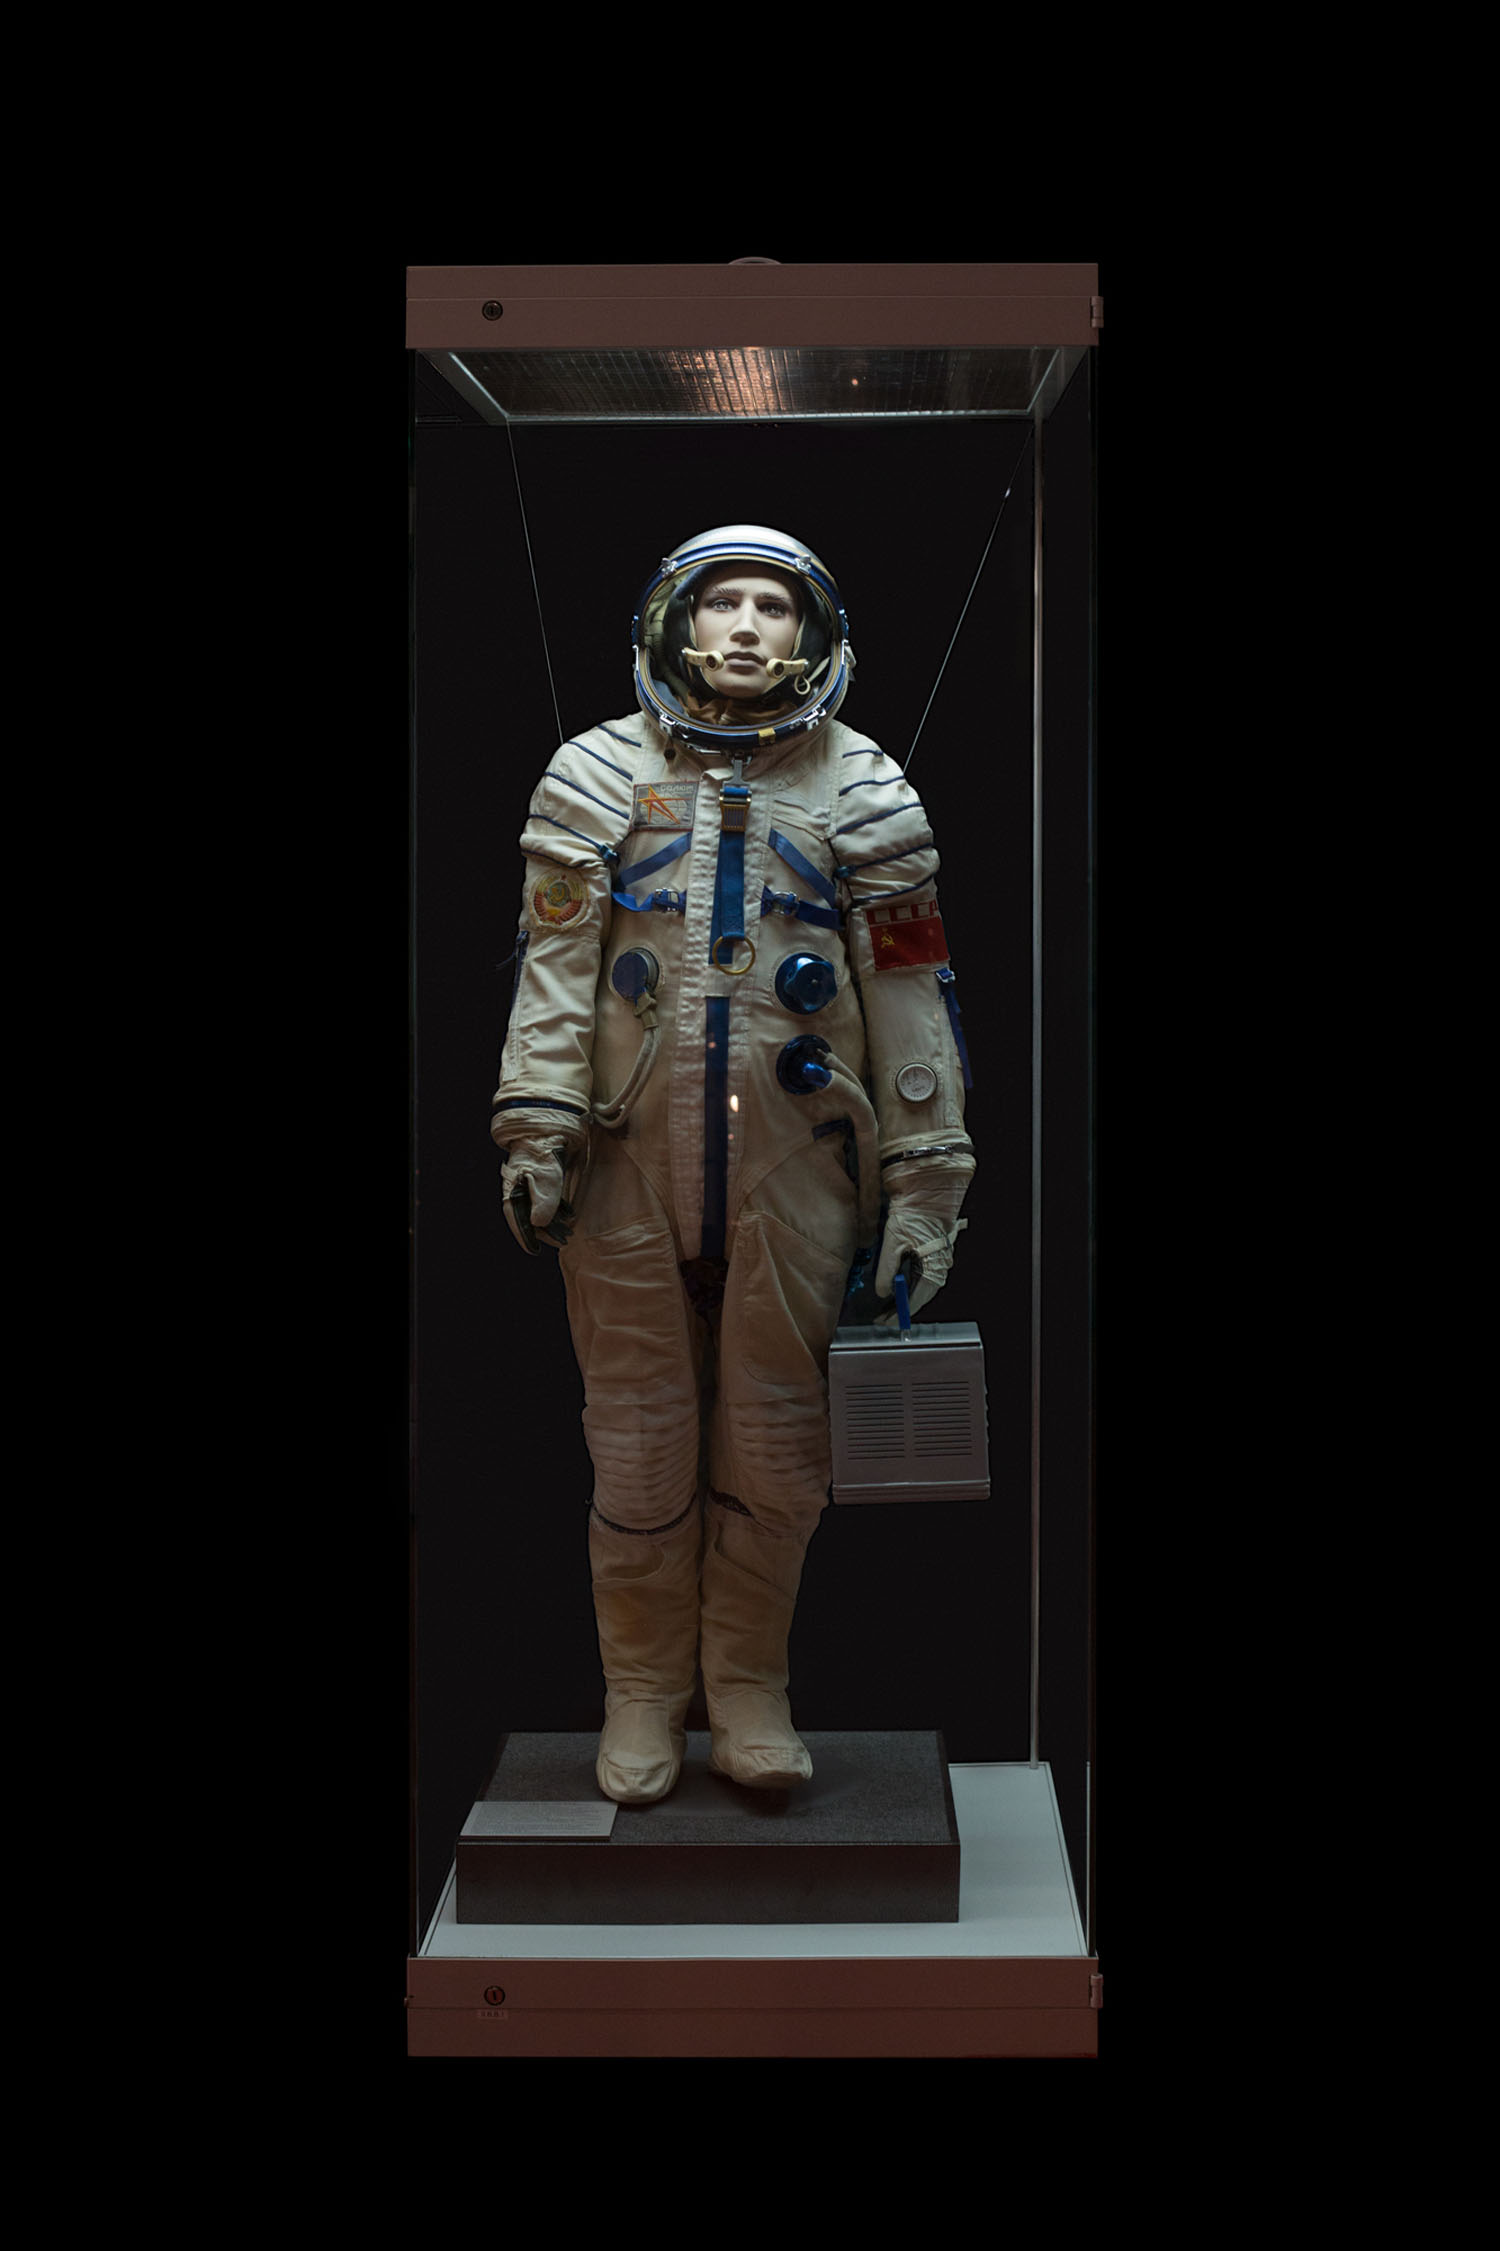 Cosmonaut at the Museum of Cosmnautics, Moscow.